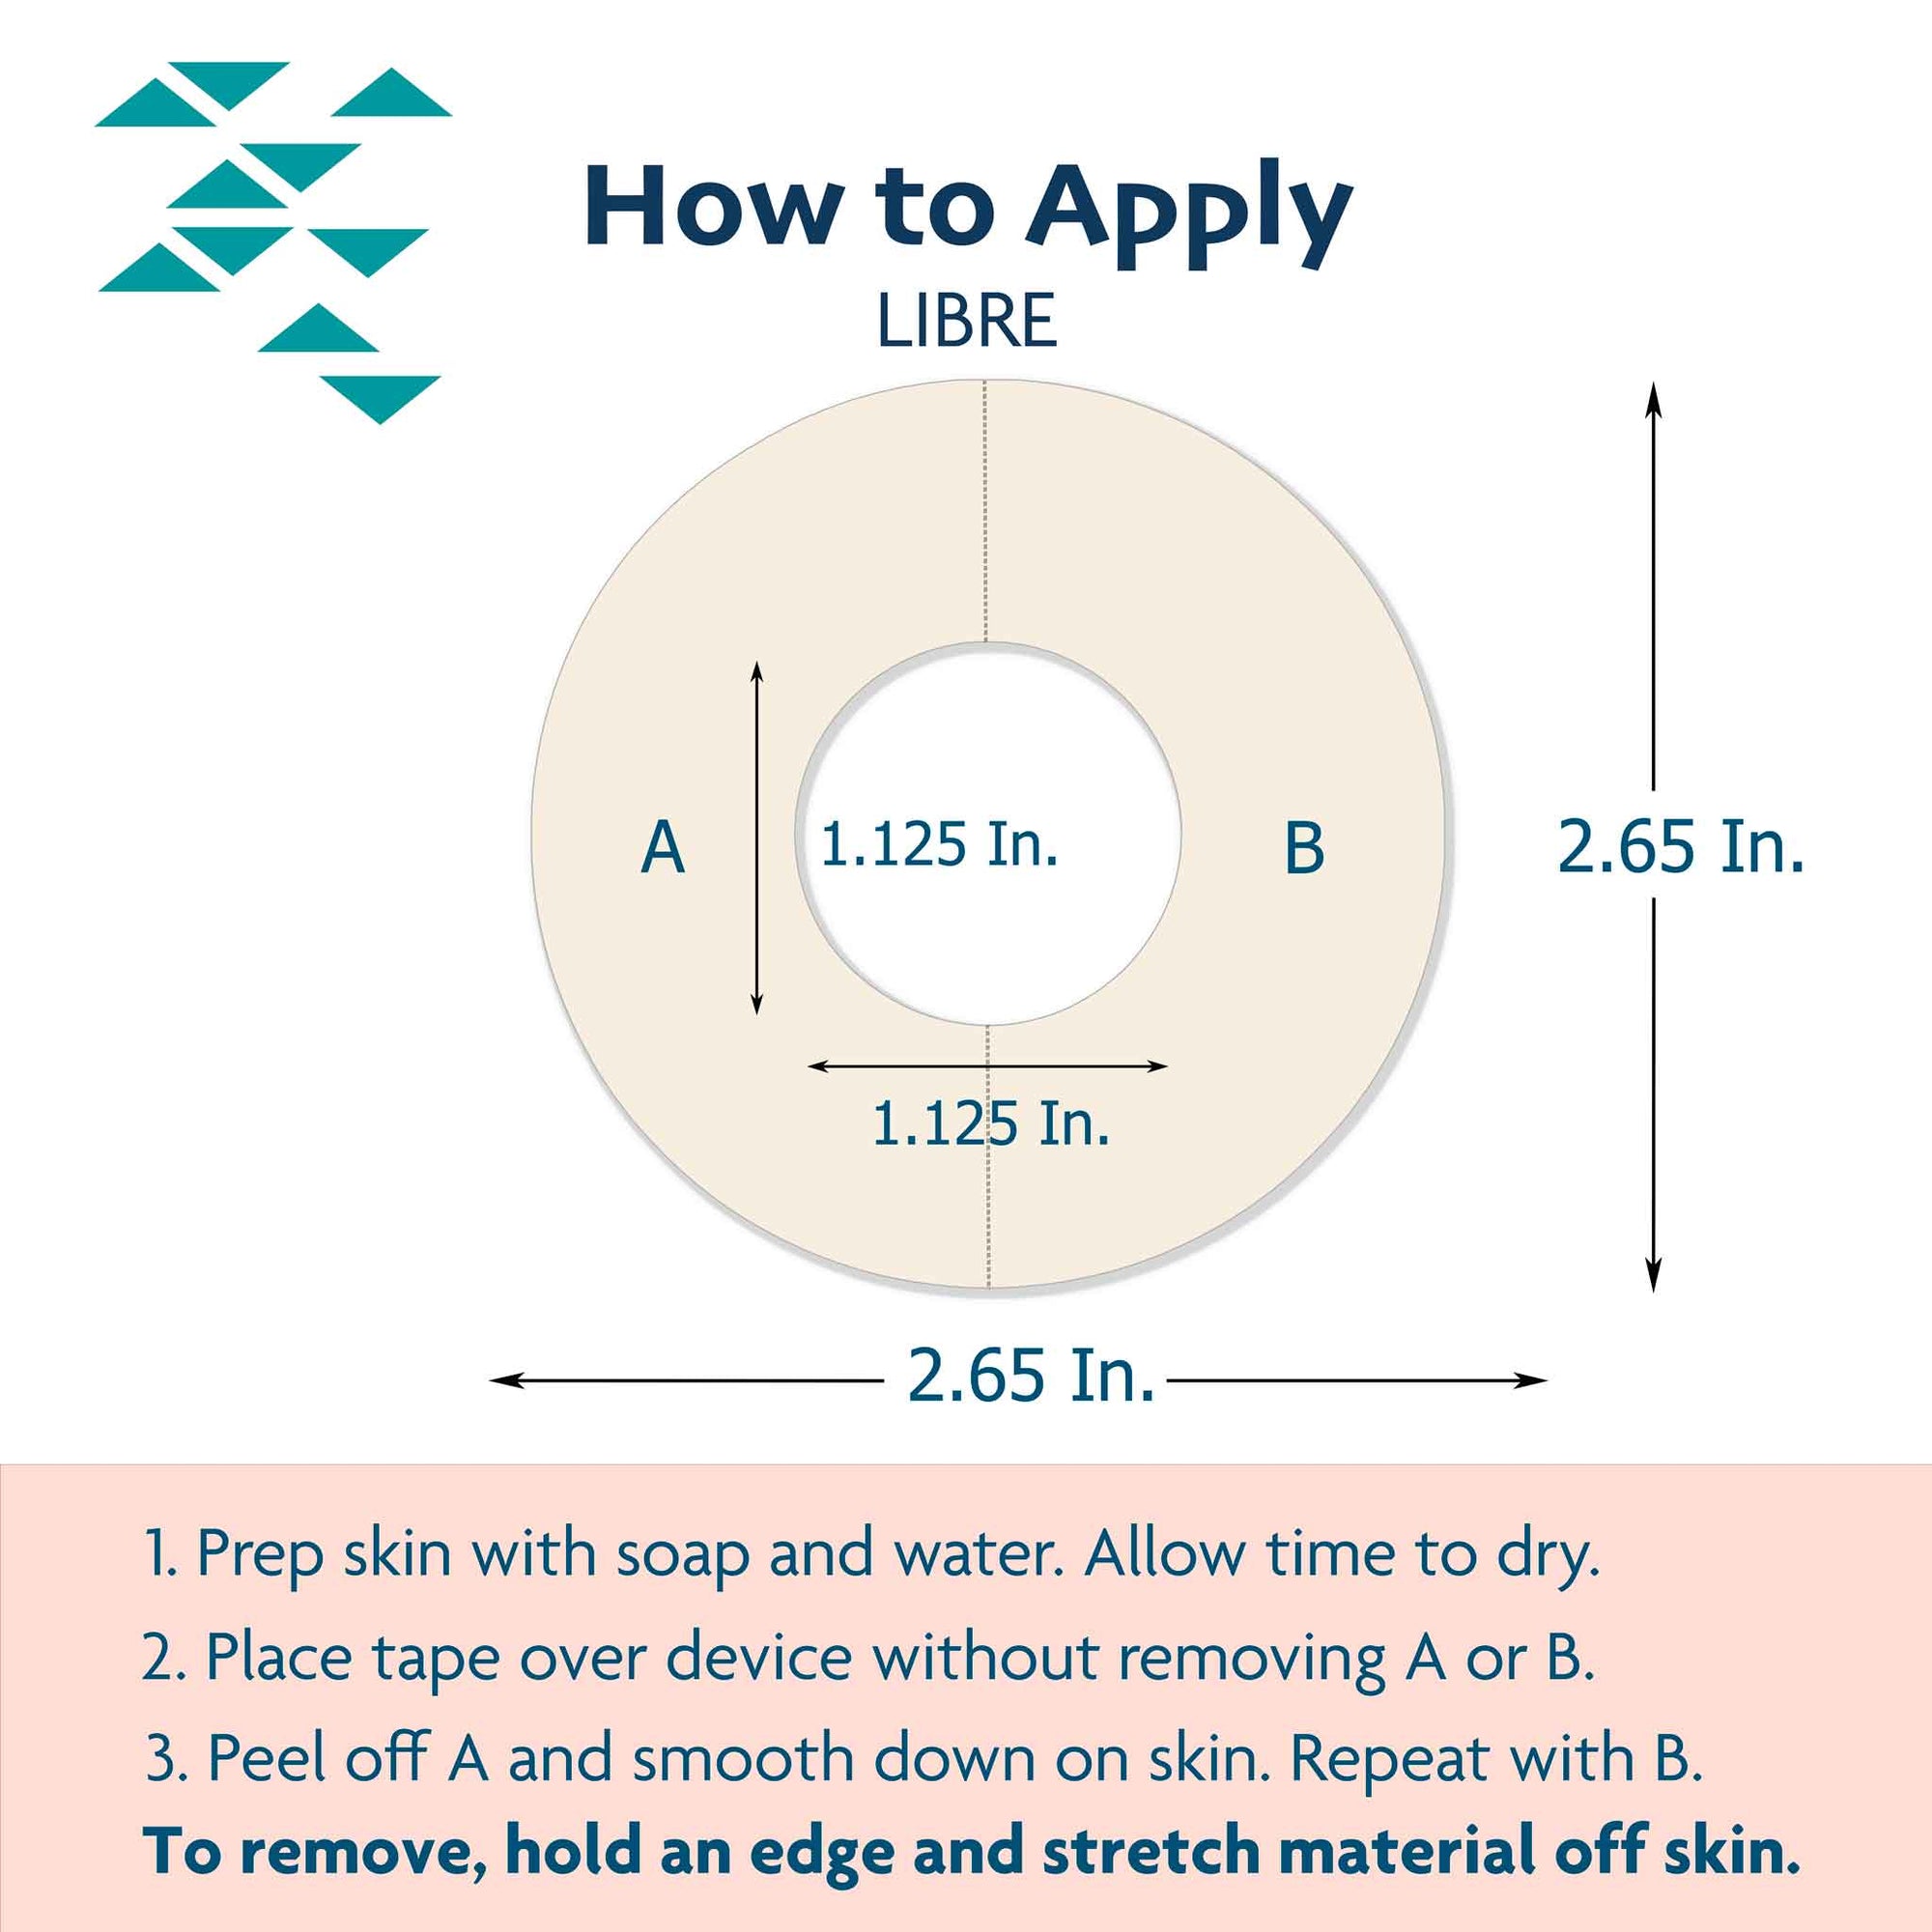 How to apply libre patch onto freestyle glucose monitor, Abbott Lingo